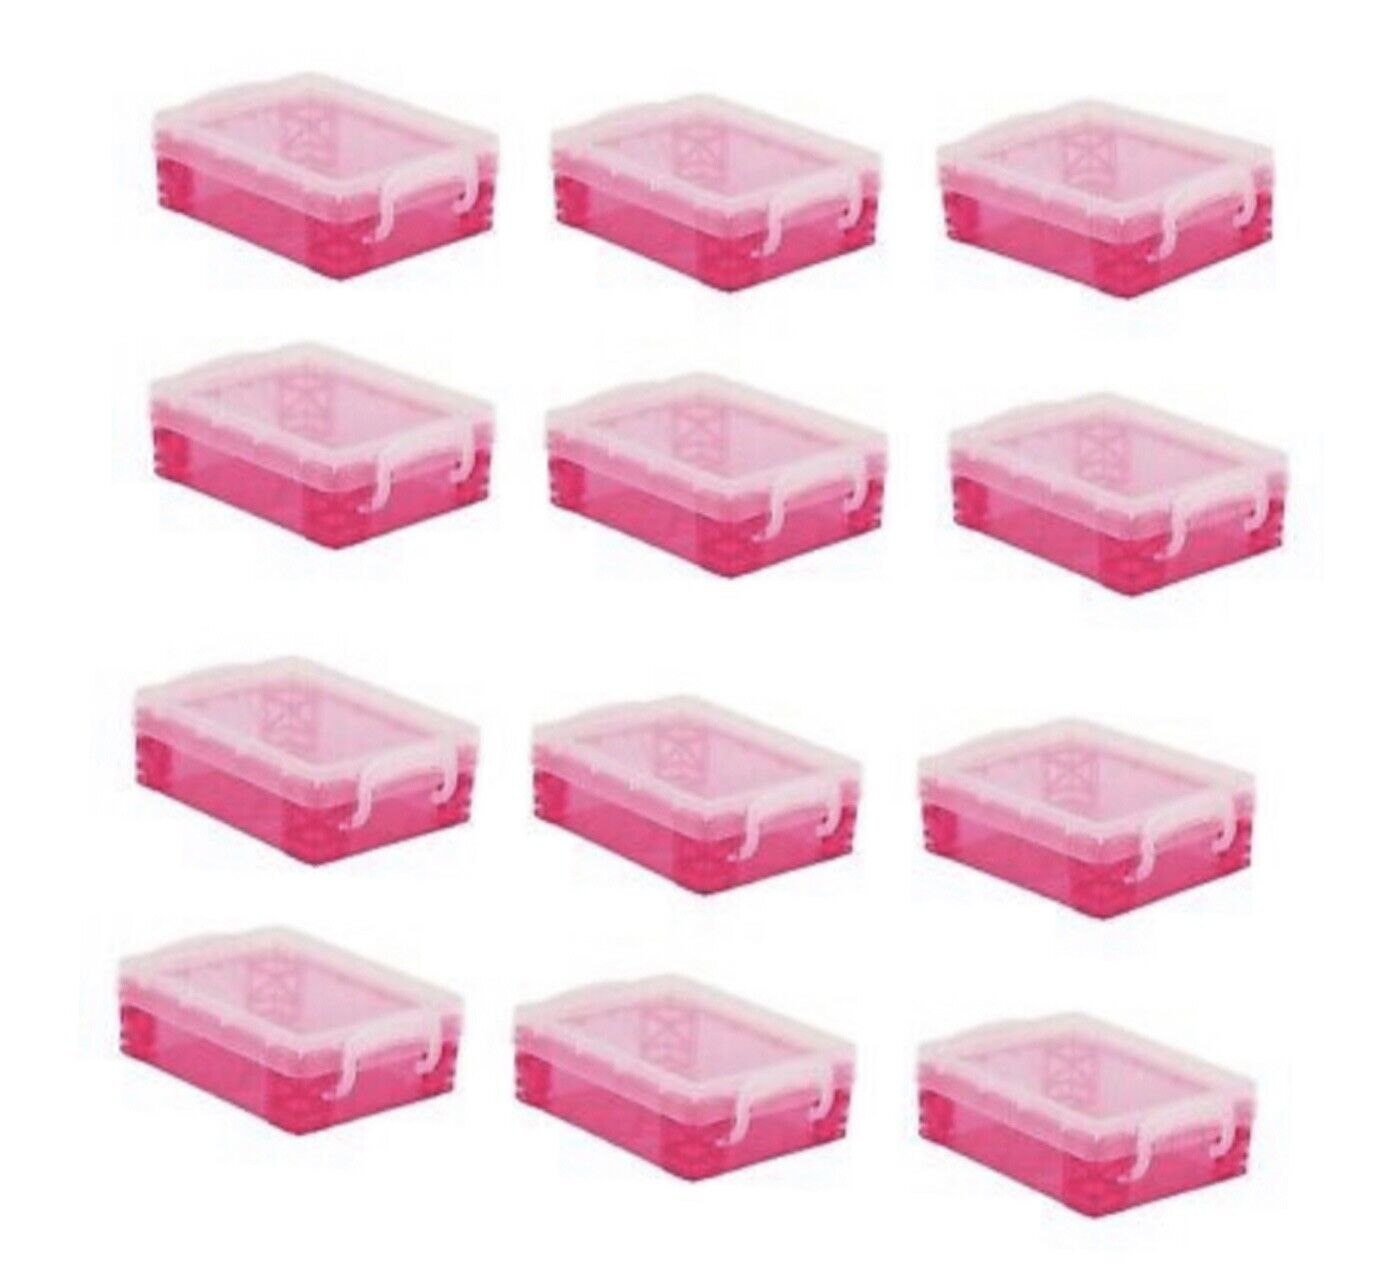 Super Stackers Crayon Boxes PINK 12-Pack NEW Super Stackers